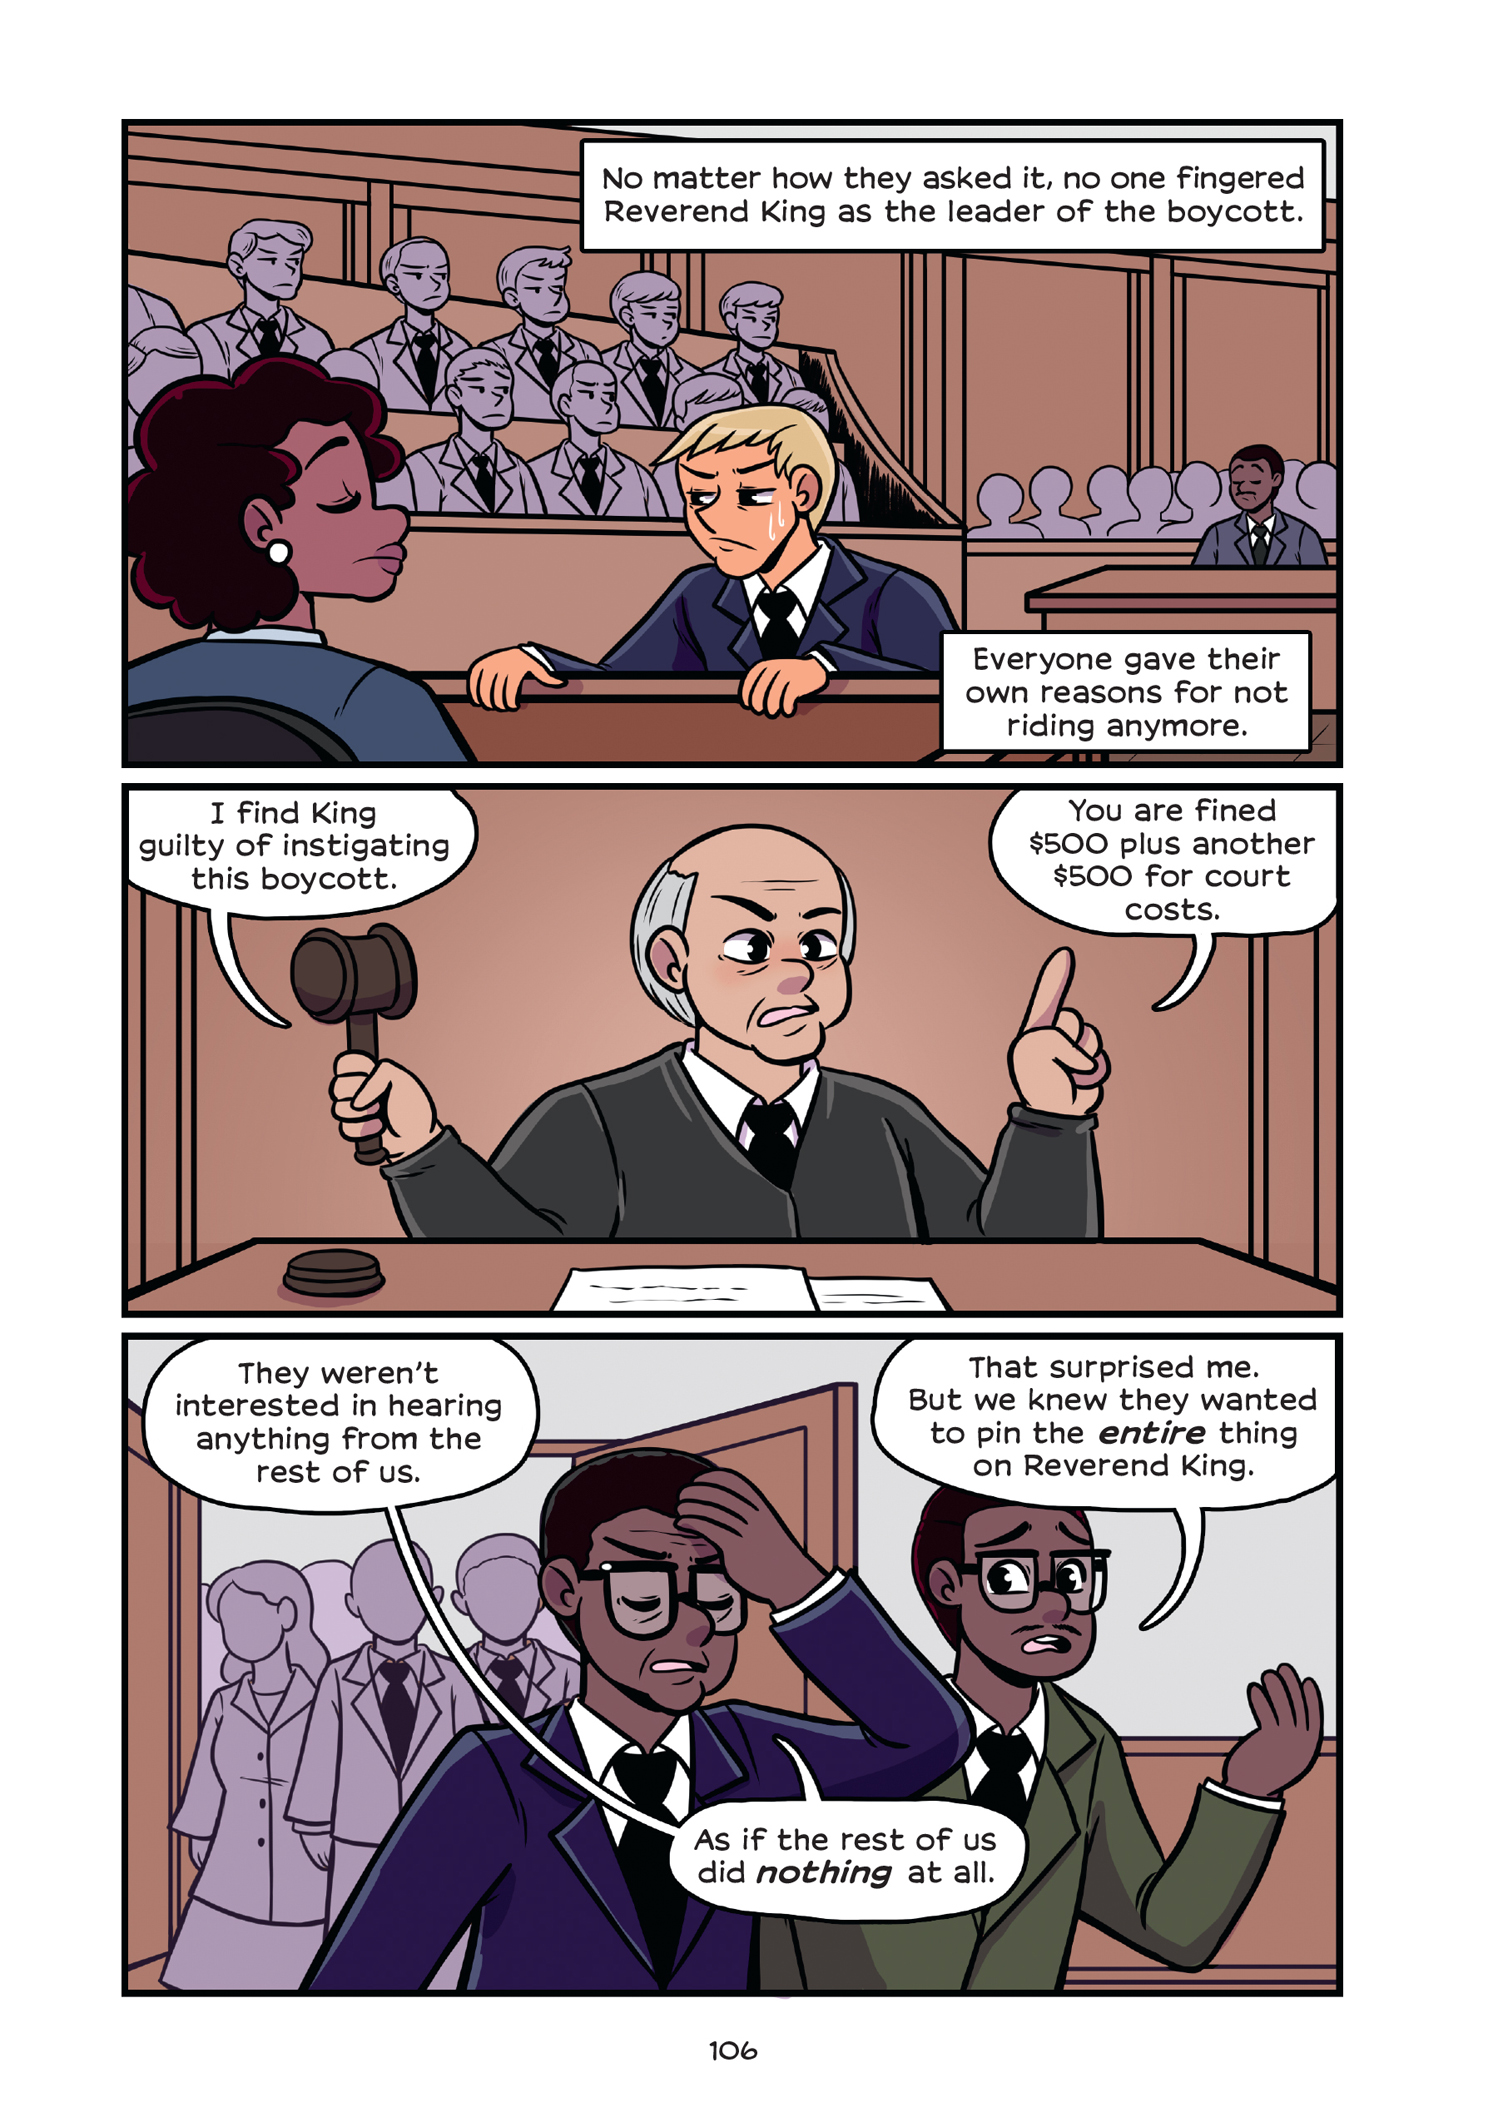 Read online History Comics comic -  Issue # Rosa Parks & Claudette Colvin - Civil Rights Heroes - 111